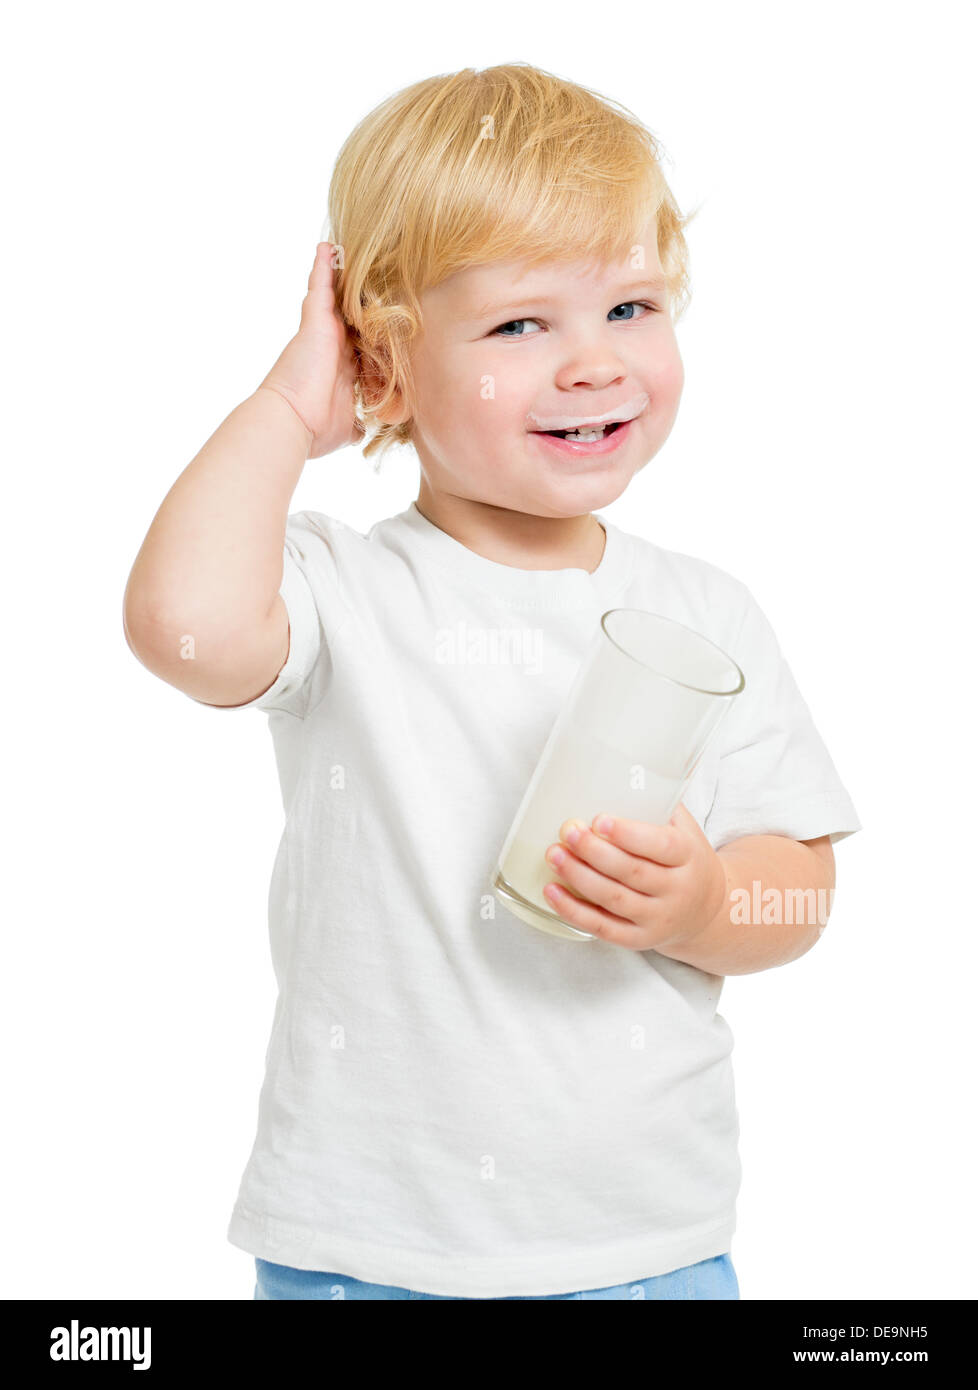 Funny kid drinking dairy product from glass isolated on white Stock Photo